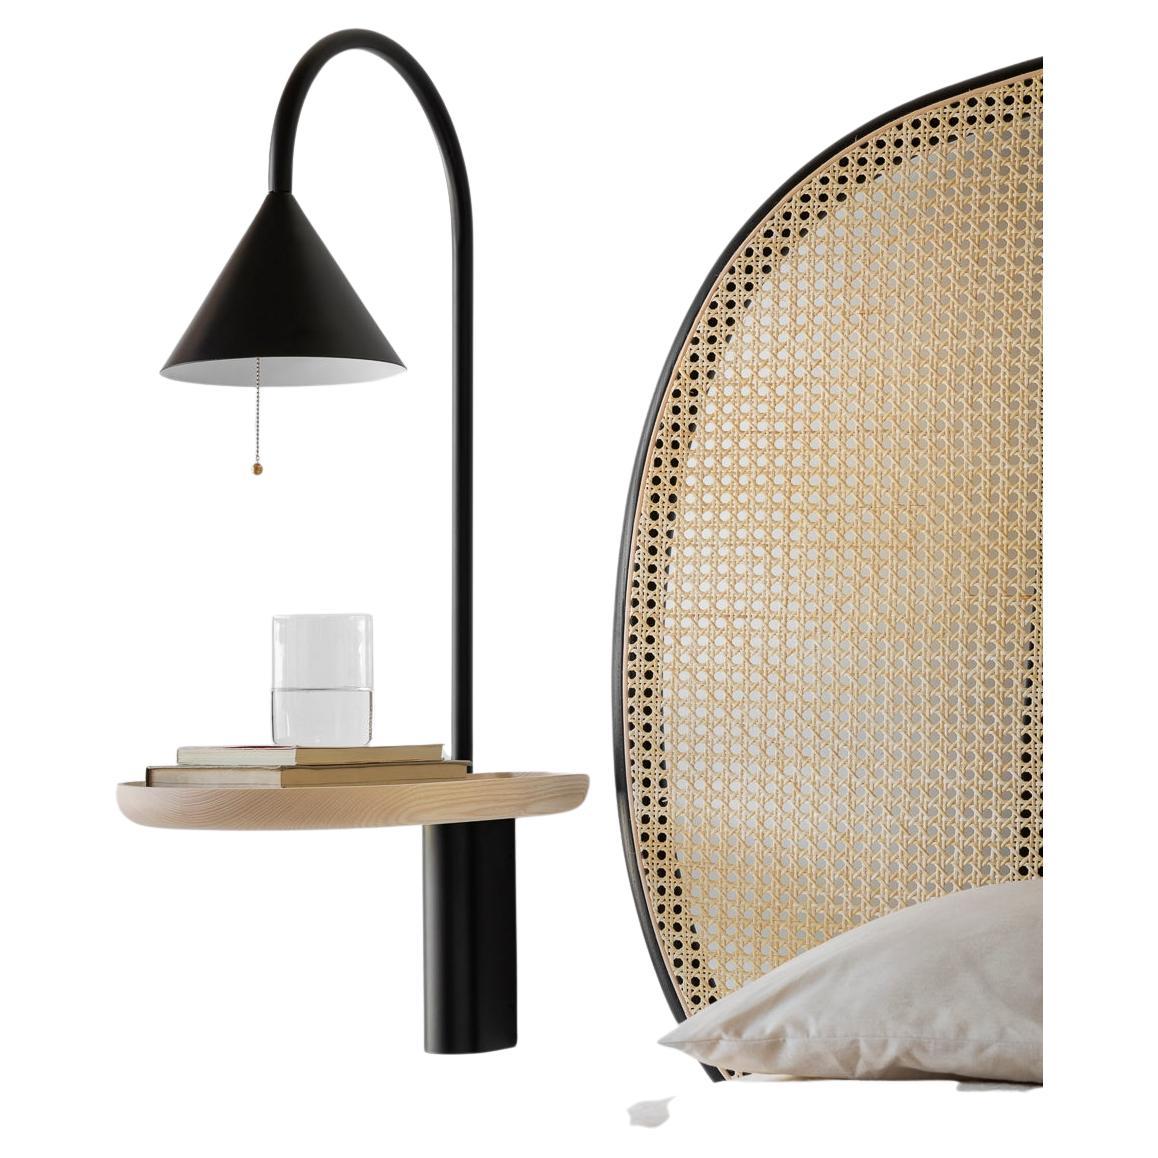 Ozz Wall Lamp by Paolo Cappello and Simone Sabatti For Sale